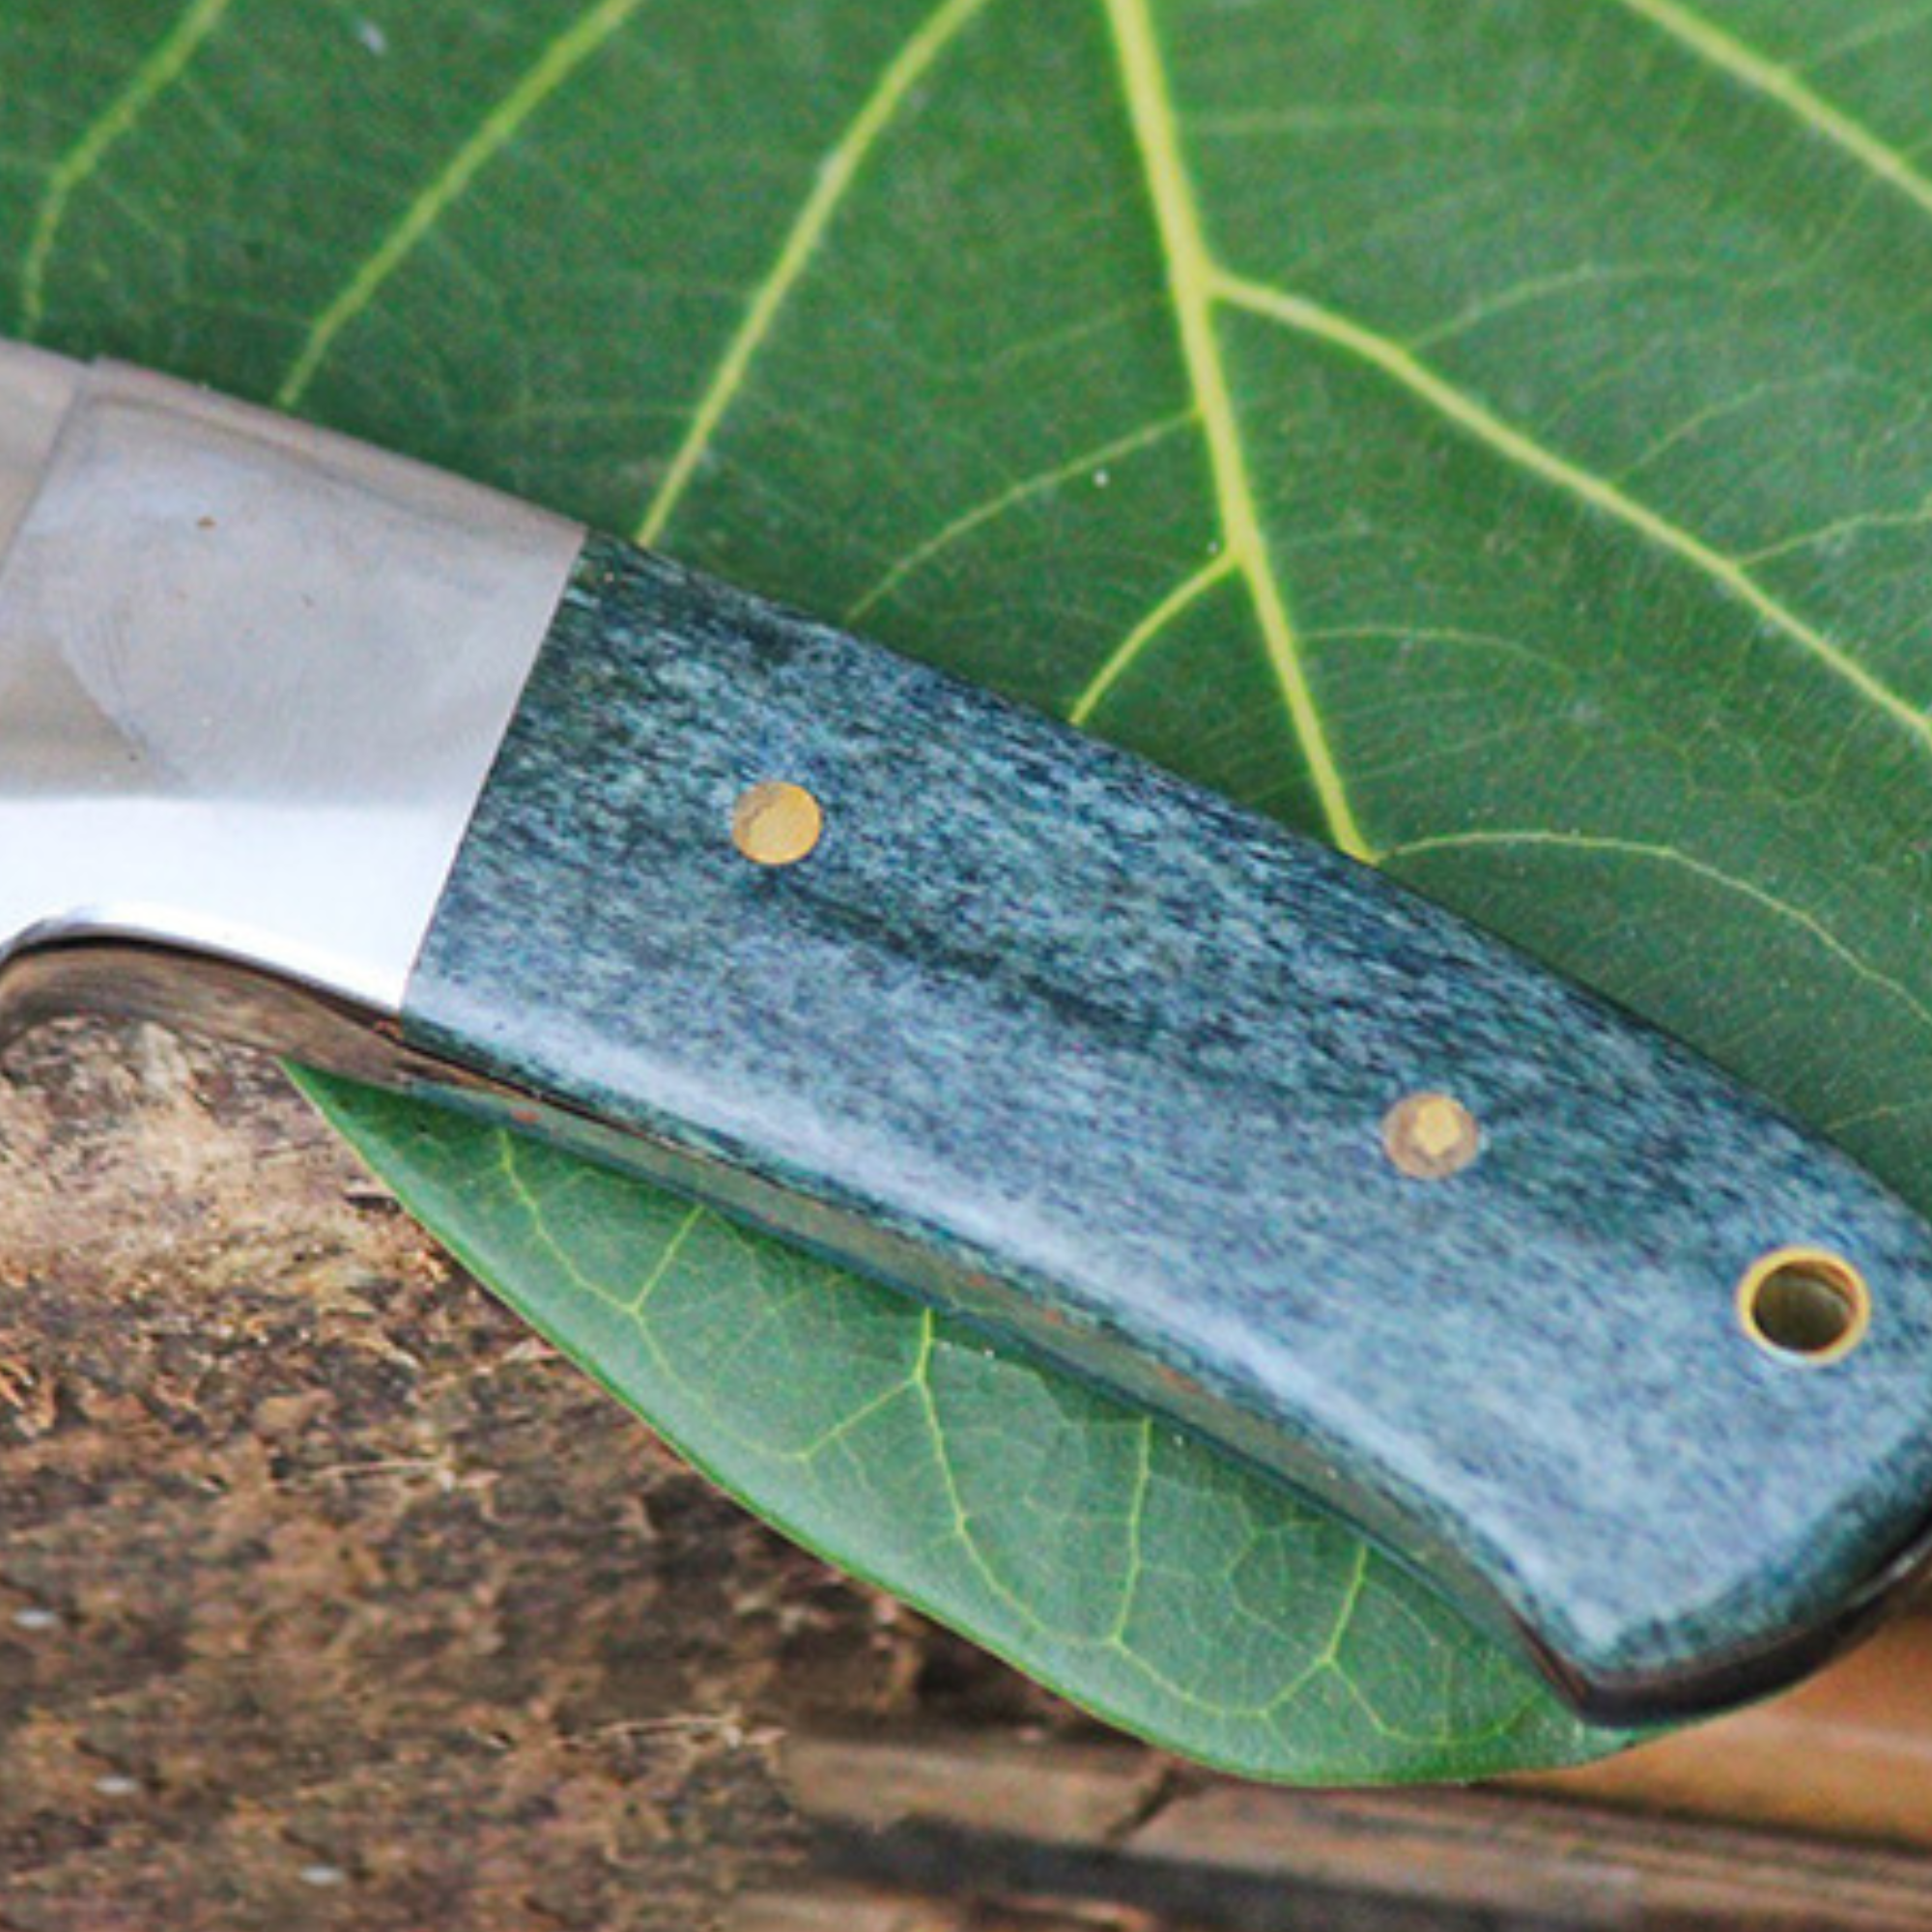 Green Fish Knife 9? Long 4.5?Blade ? 9oz 440c stainless steel Hunting Fixed Blade Bowie Skinner Survival Handmade Knife